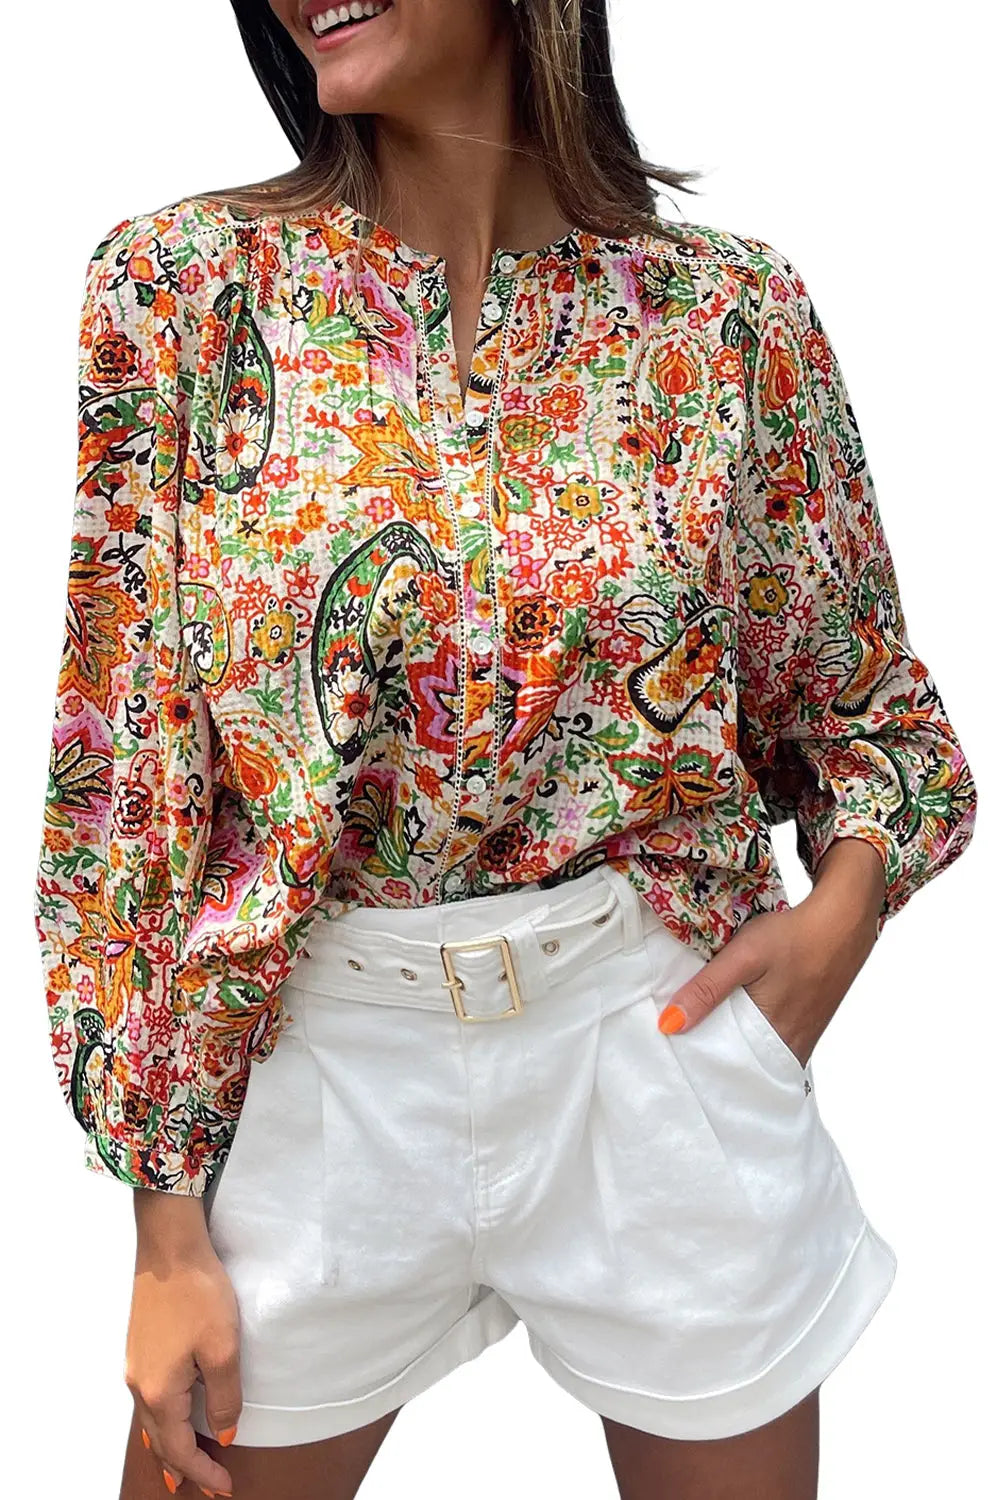 Multicolour floral print lace splicing button up puff sleeve shirt - blouses & shirts